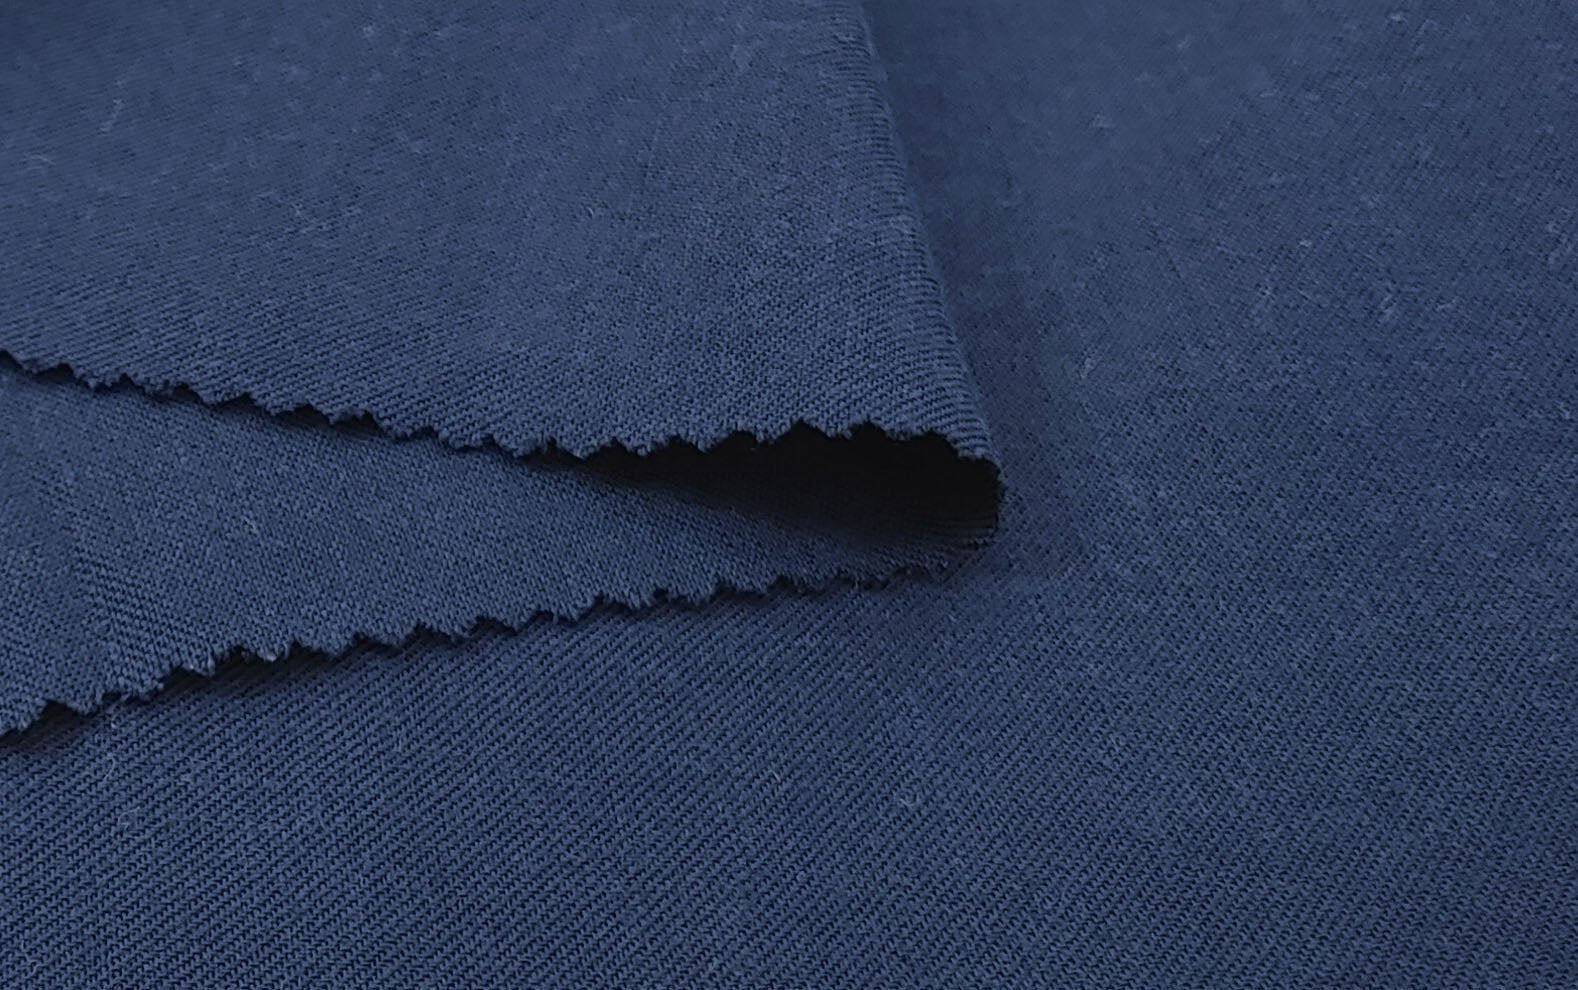 Linen Tencel Twill Fabric for Versatile and Elegant Creations 3217 6895 3530 - The Linen Lab - Navy